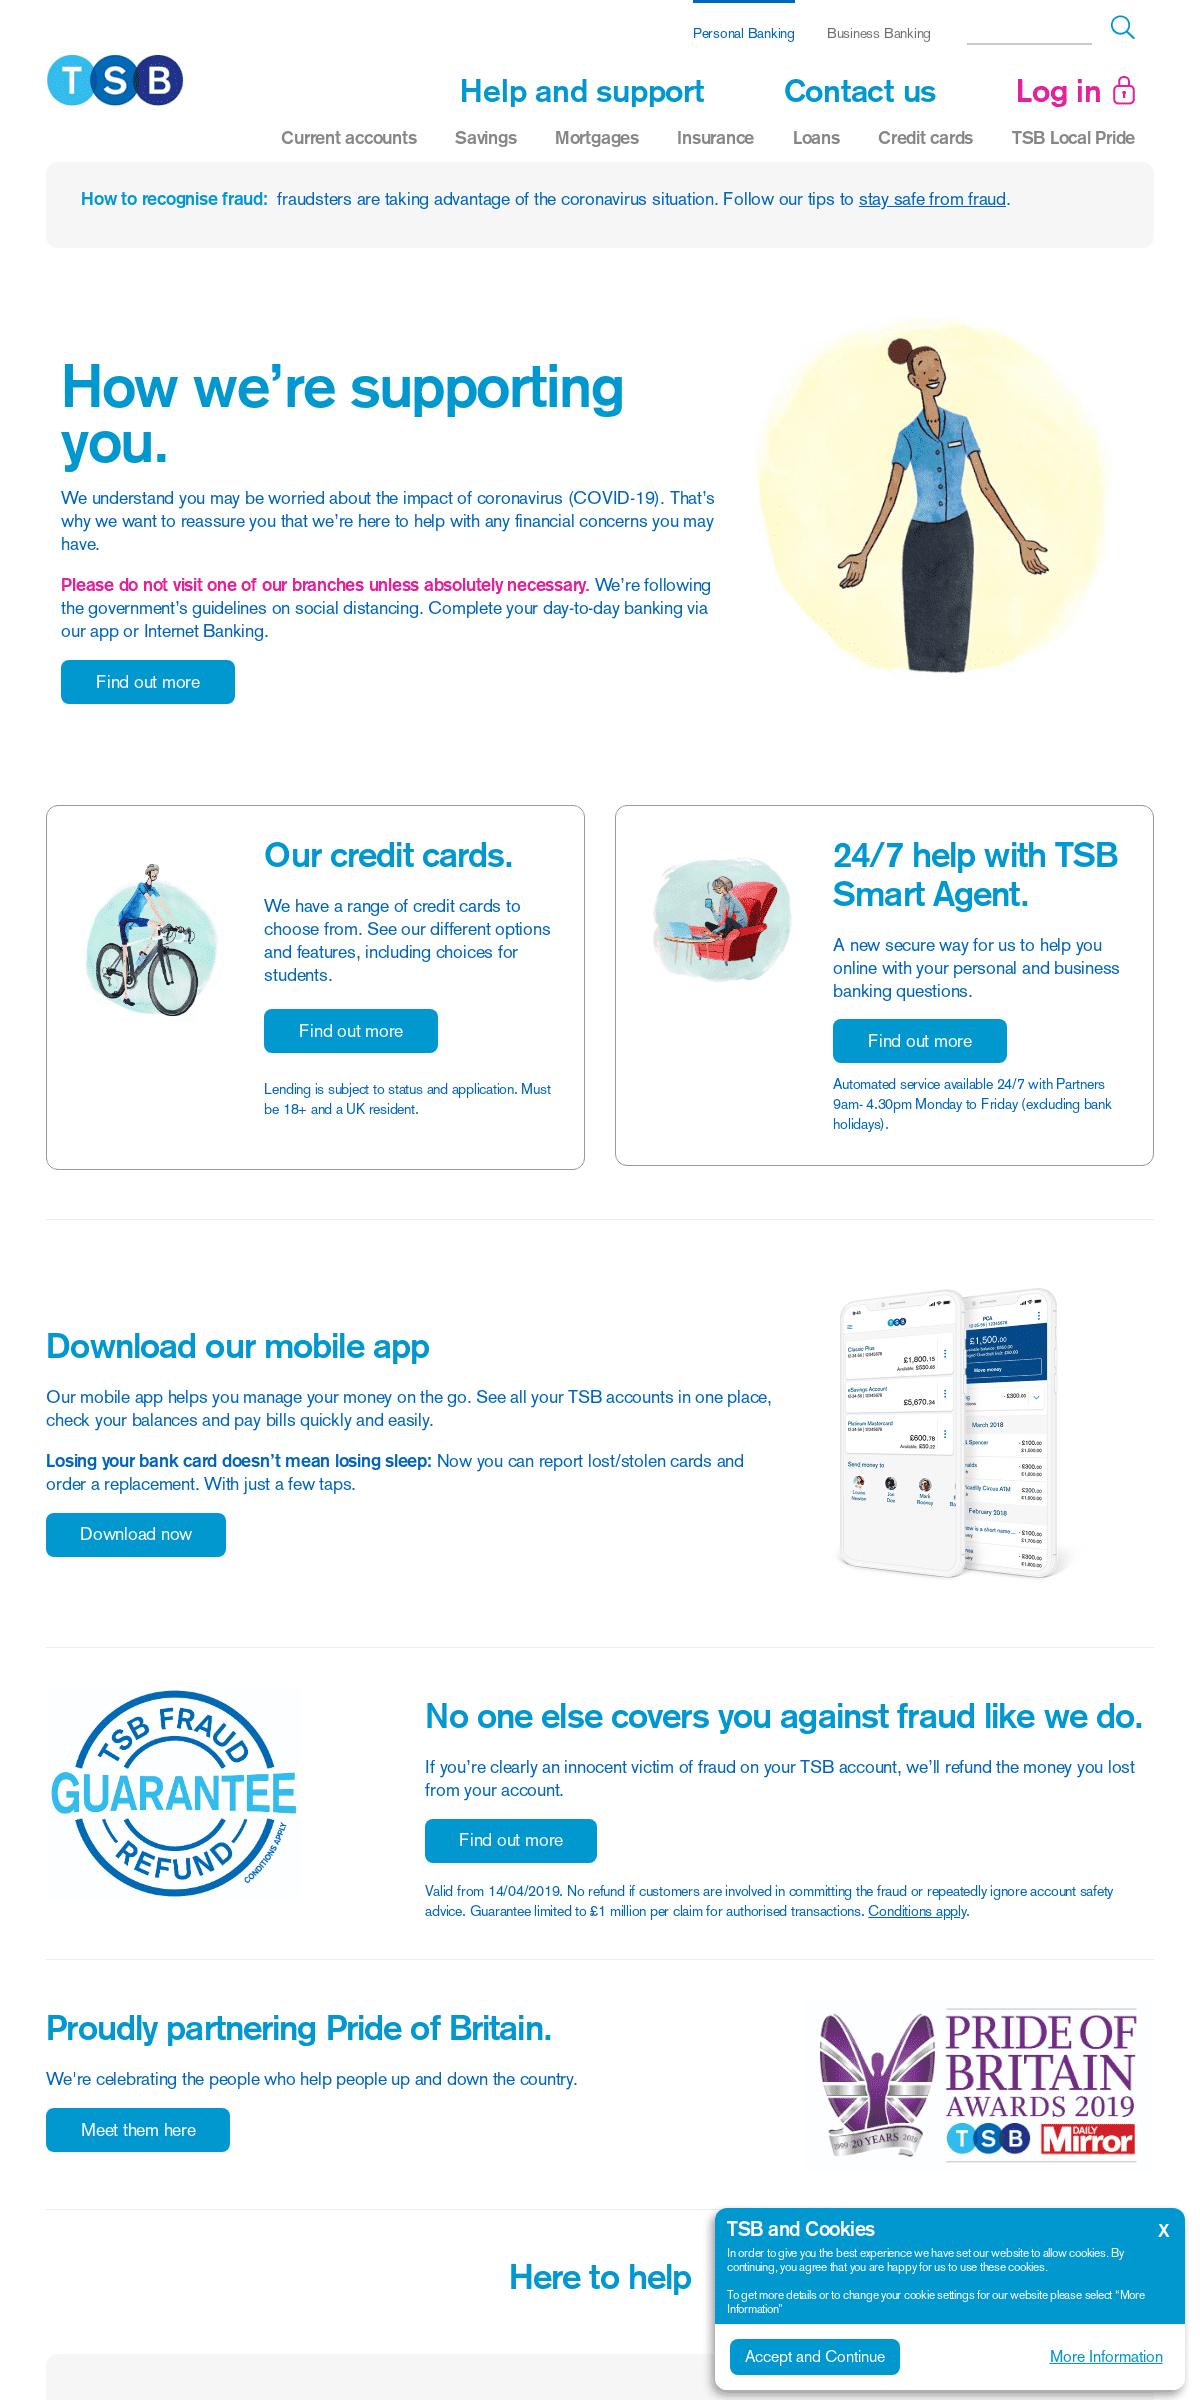 A complete backup of tsb.co.uk